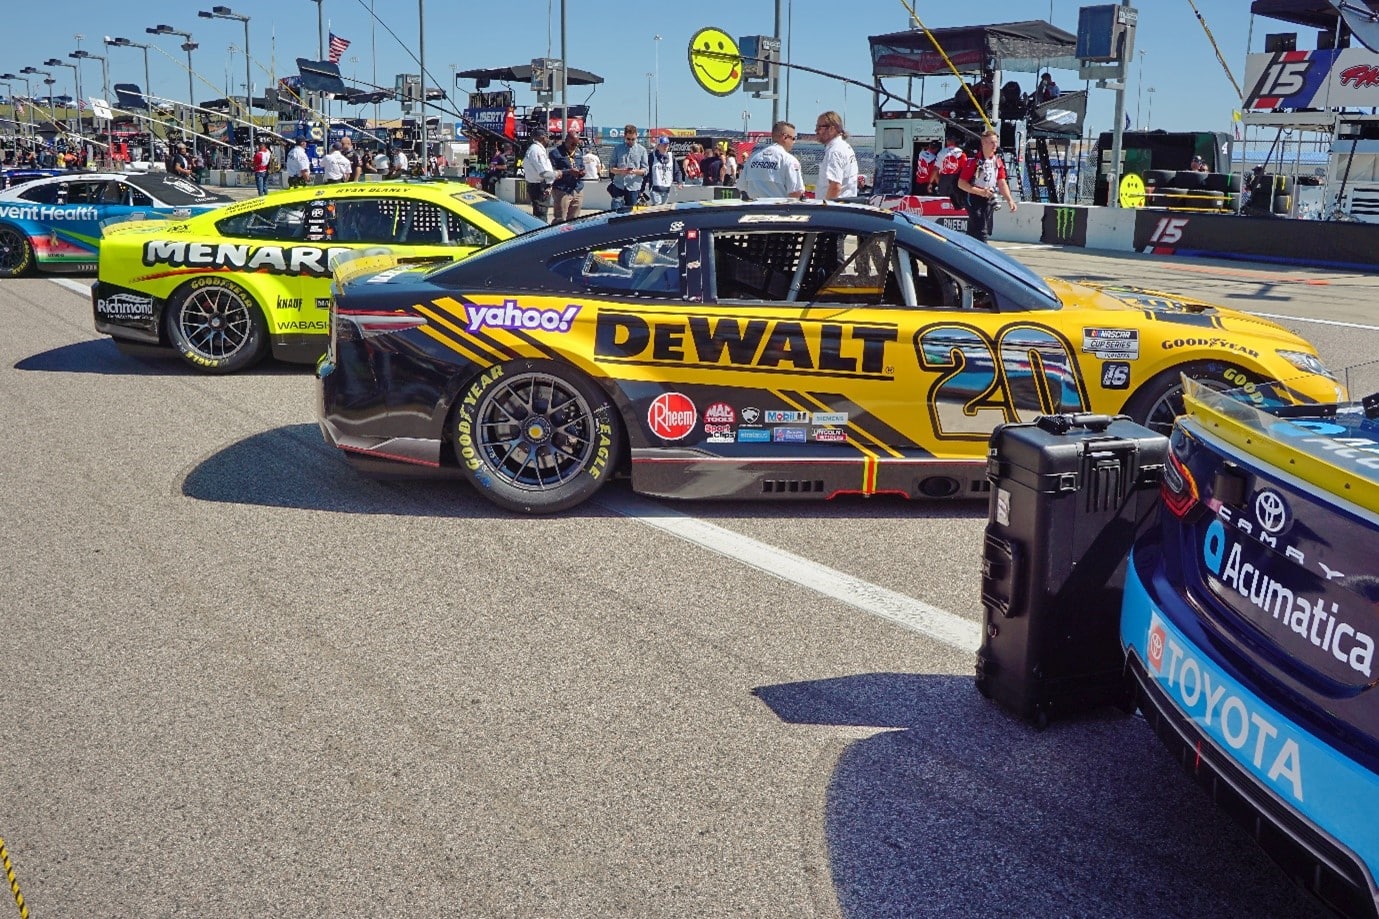 Nascar Cars Lining Up by Pit Side